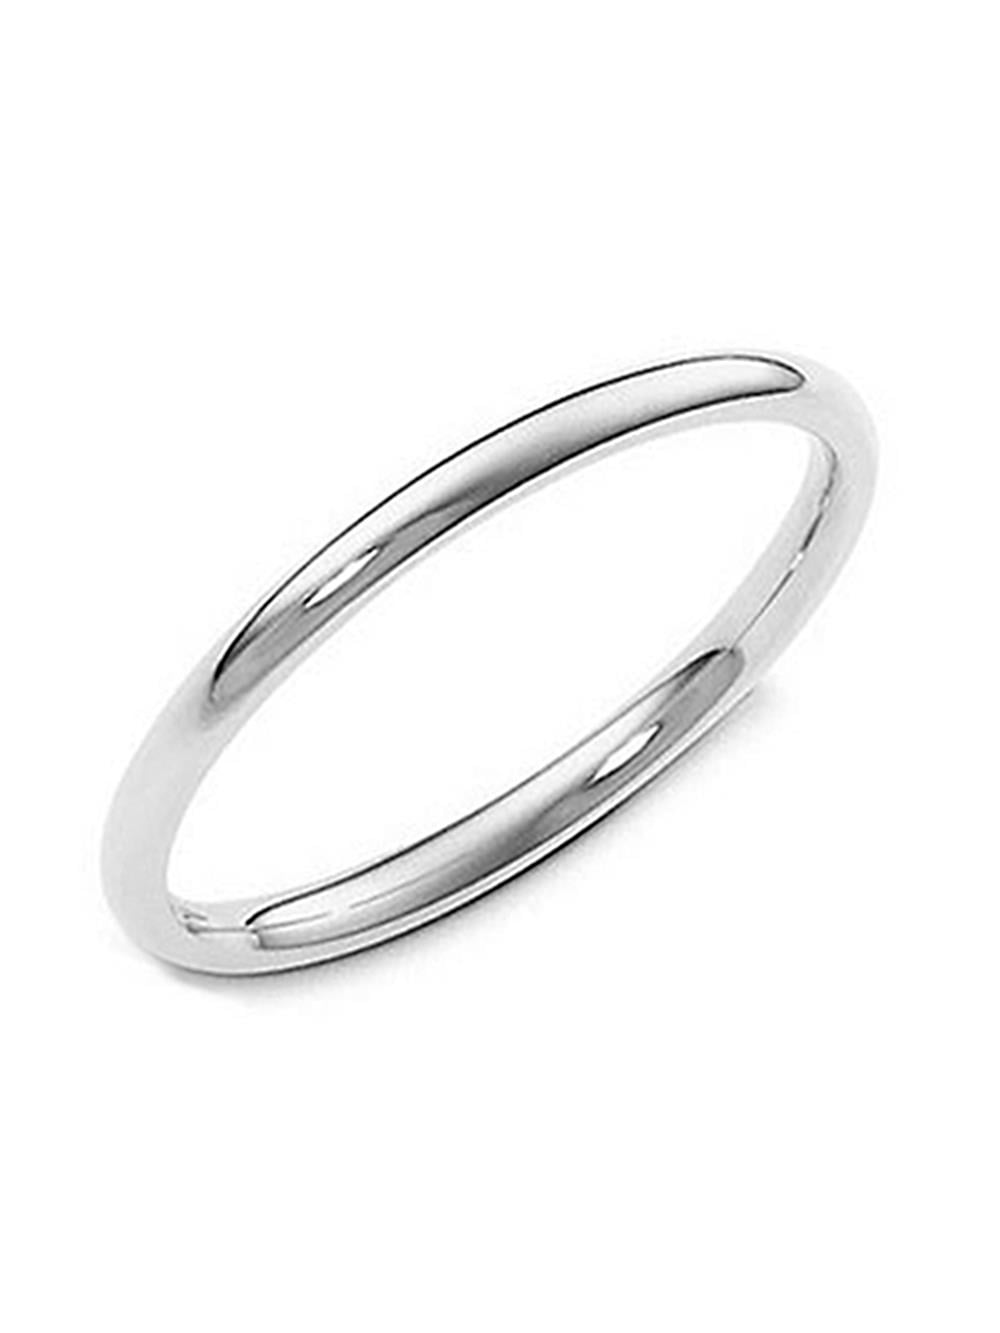 BORUO 925 Sterling Silver Ring High Polish Thin Beaded Bali Stackable Tarnish Resistant Engagement Wedding Band 2mm Ring 4-12